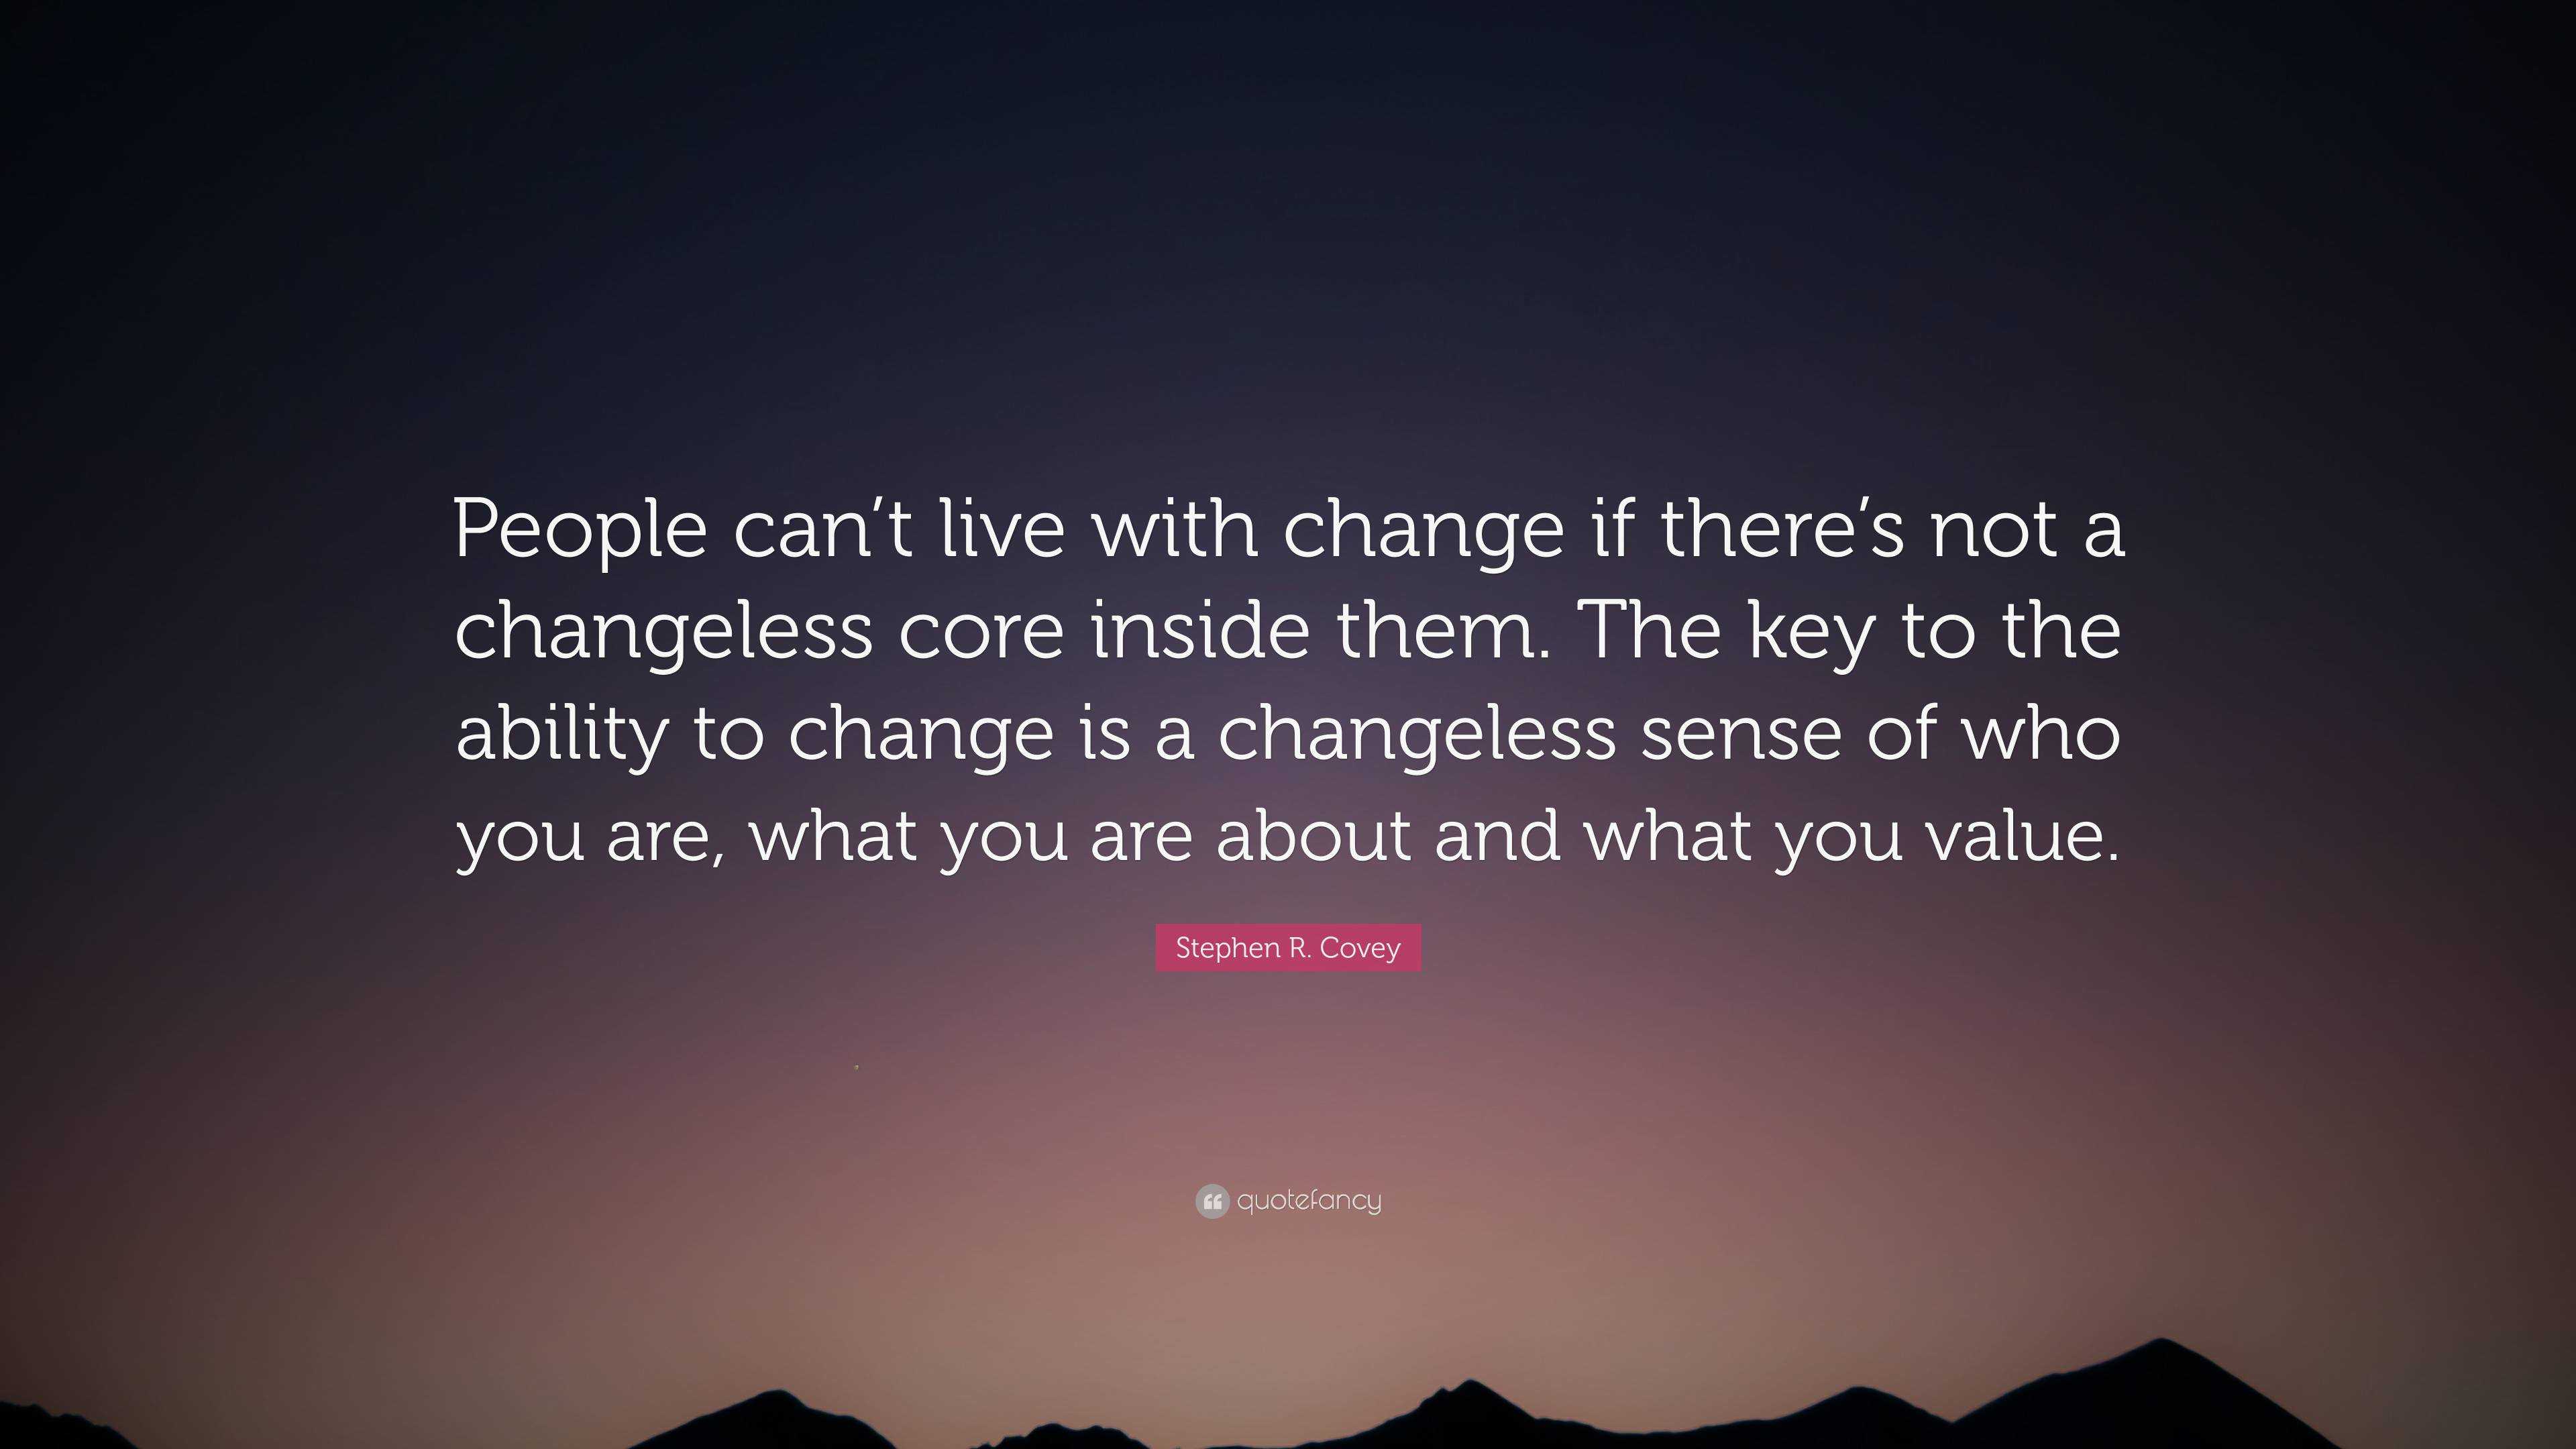 Stephen R. Covey Quote: “People can’t live with change if there’s not a ...